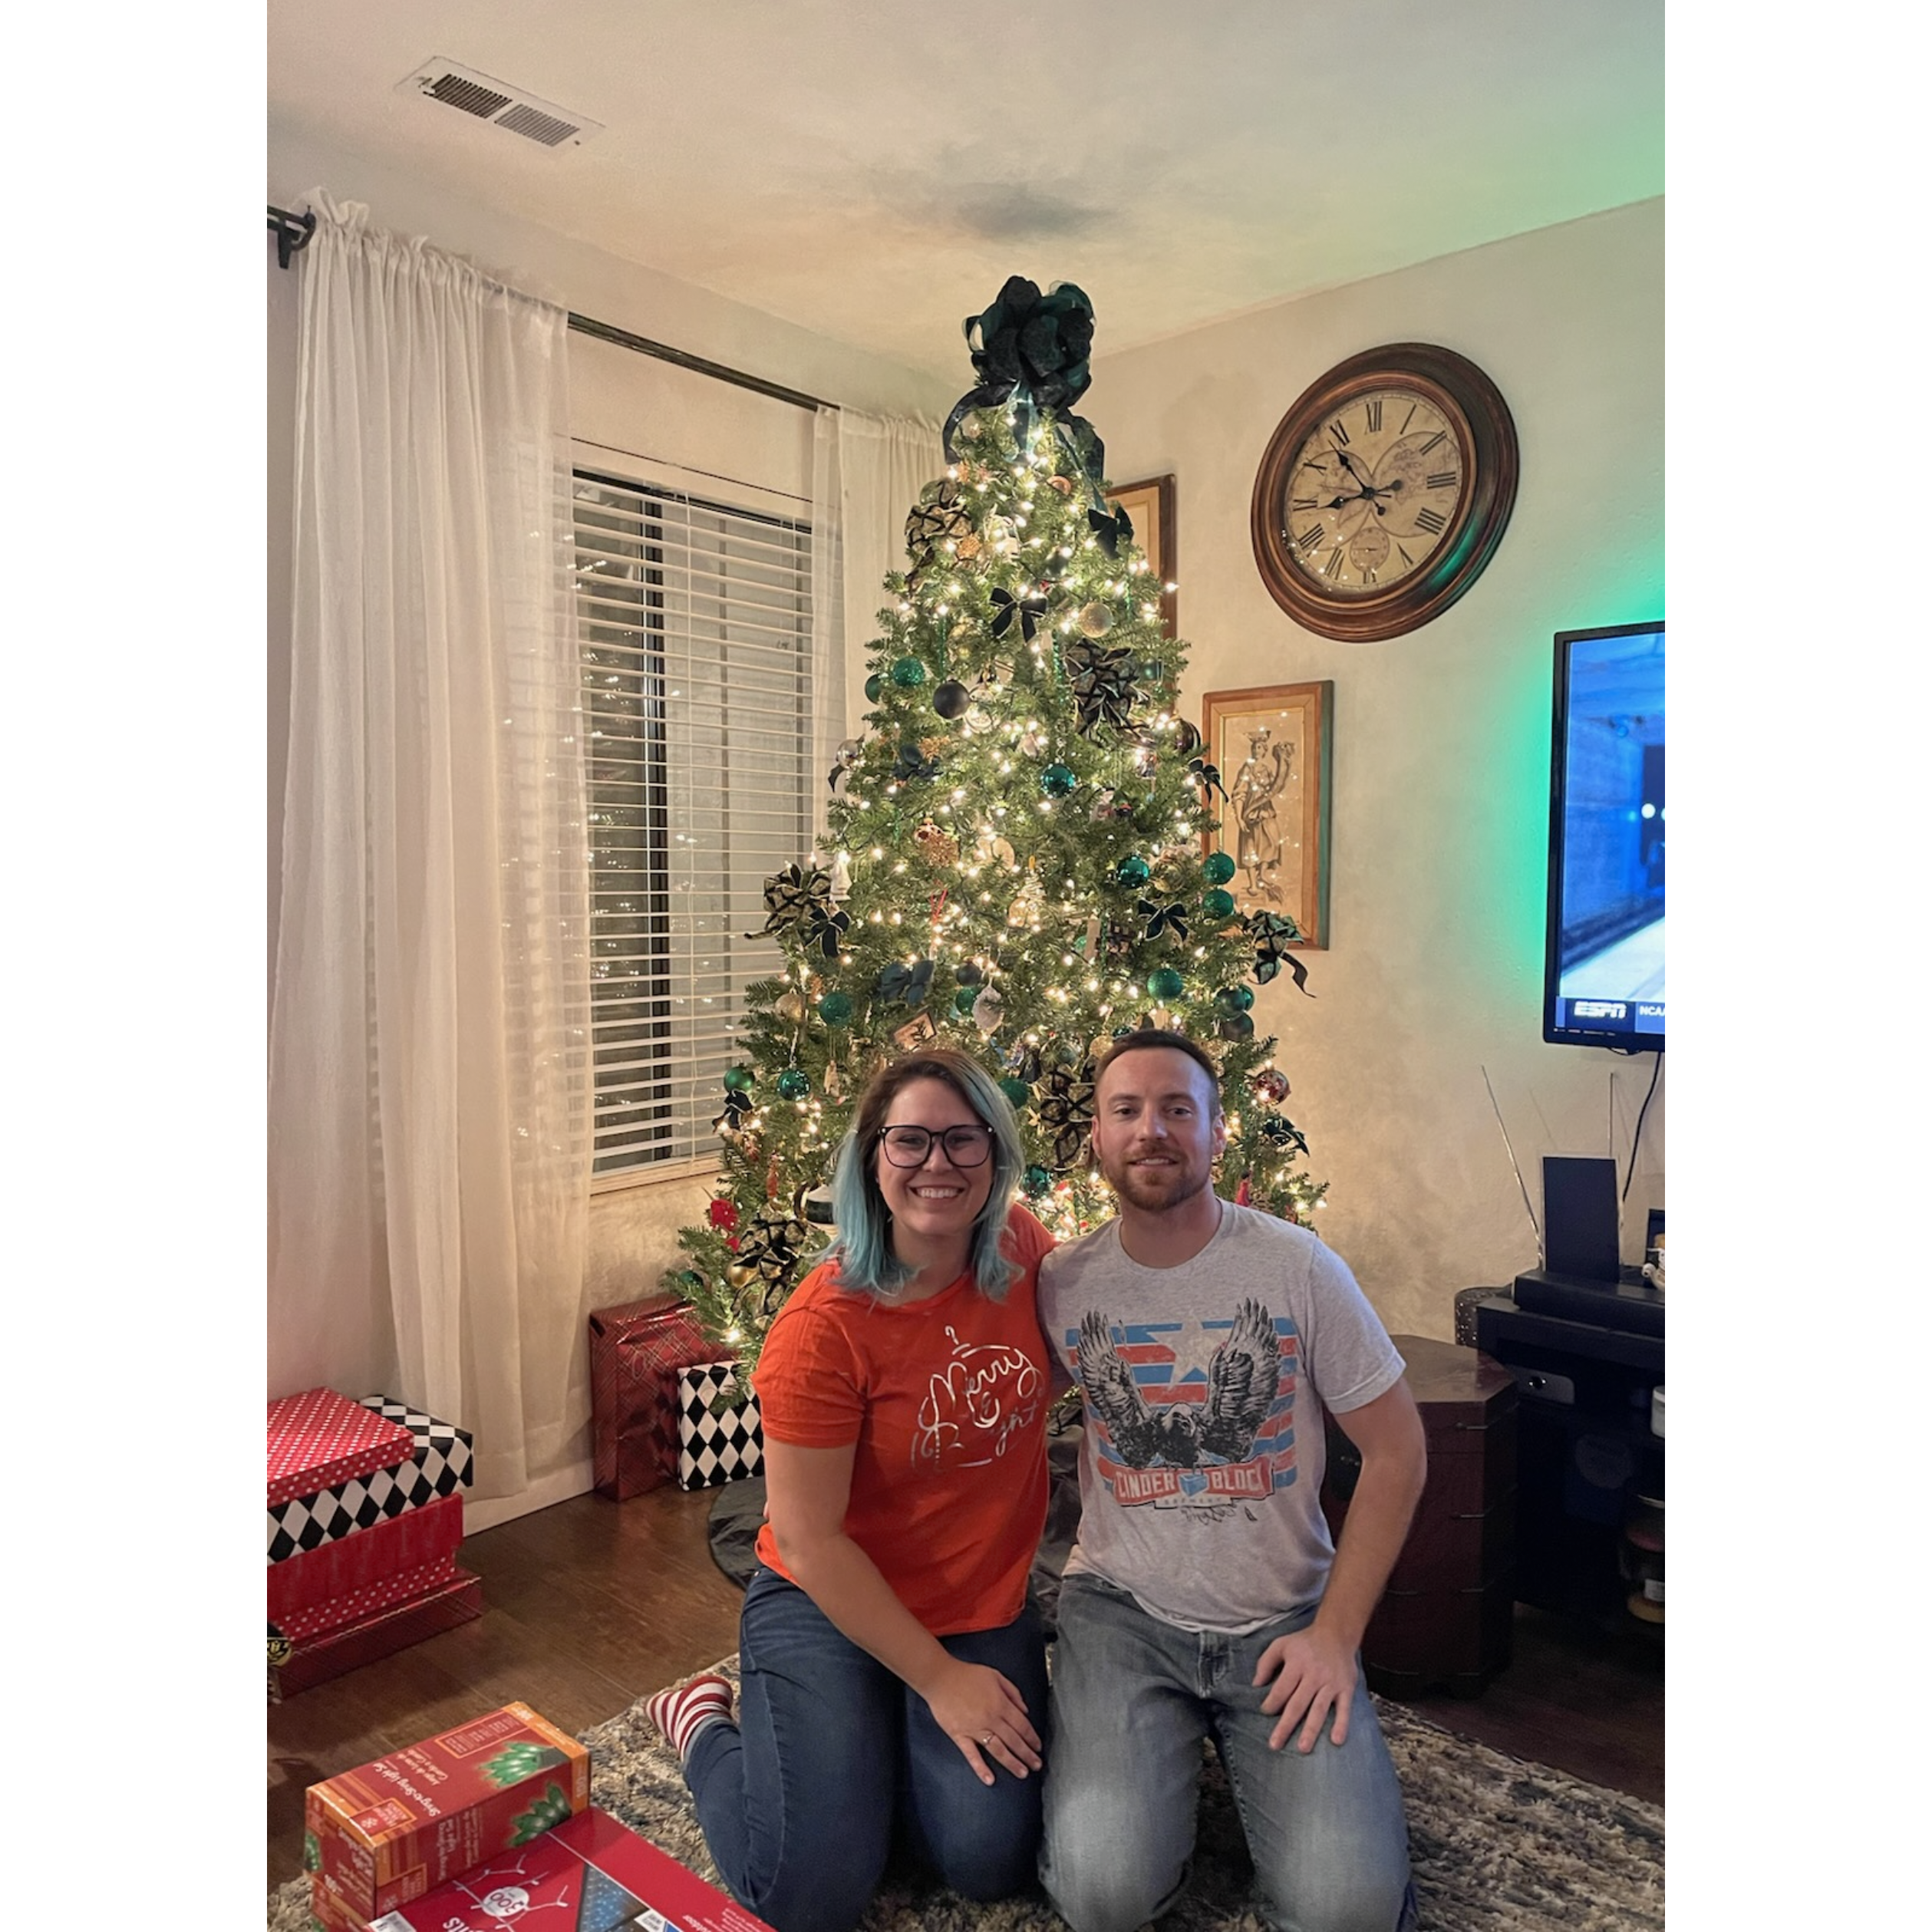 Our first Christmas together